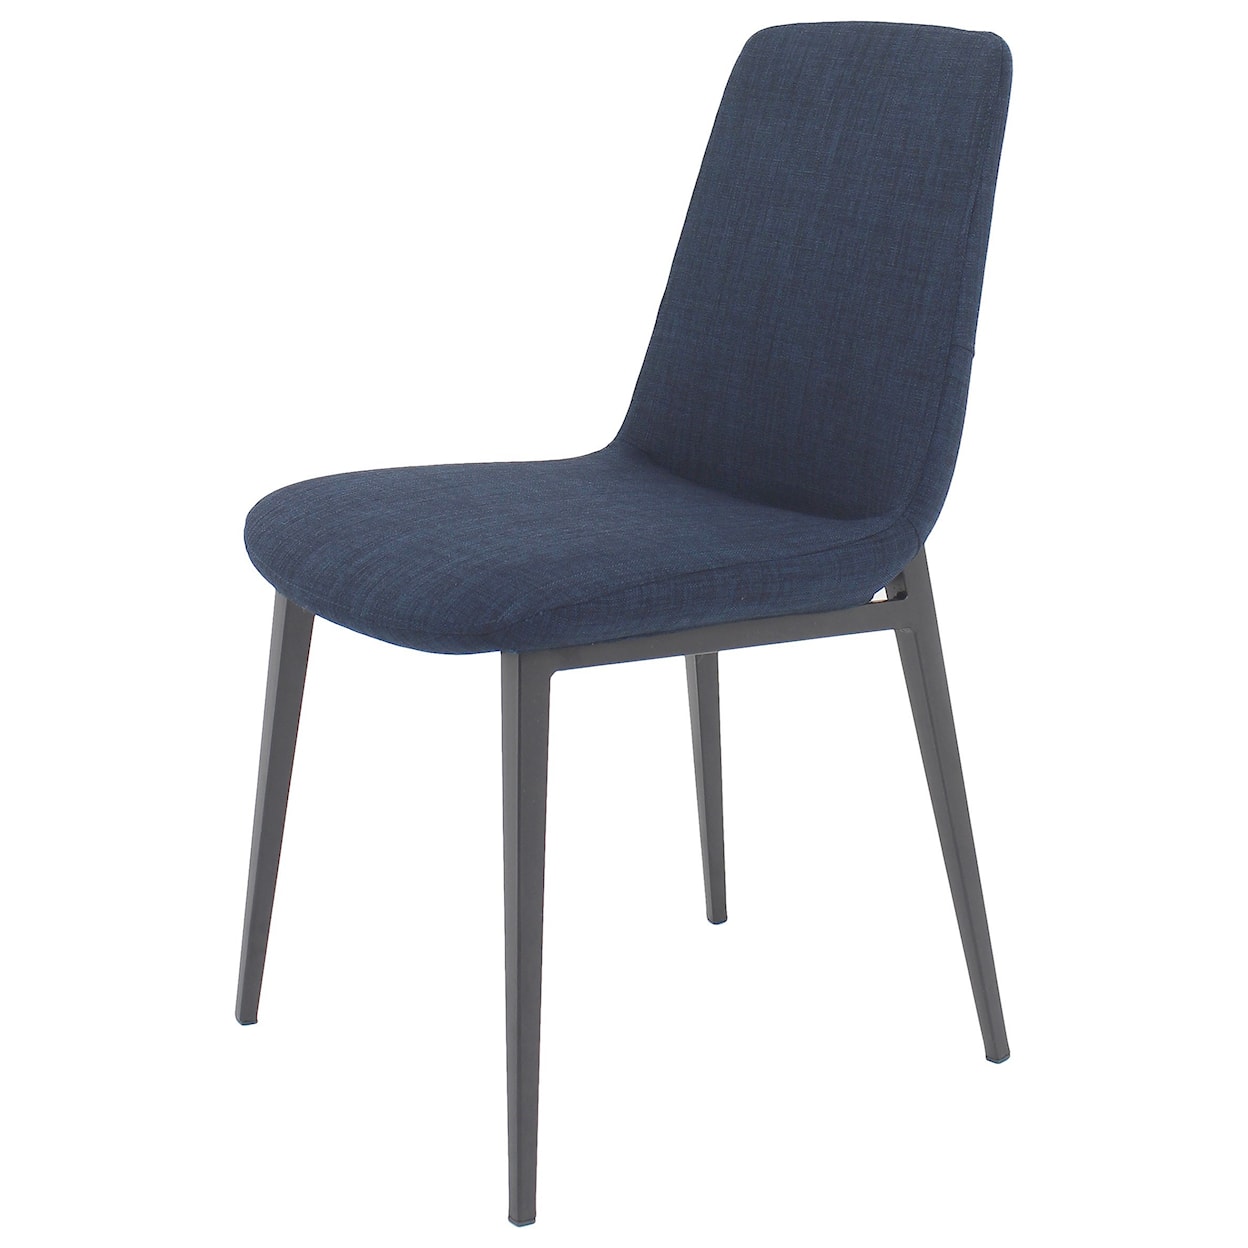 Moe's Home Collection Kito Dining Chair